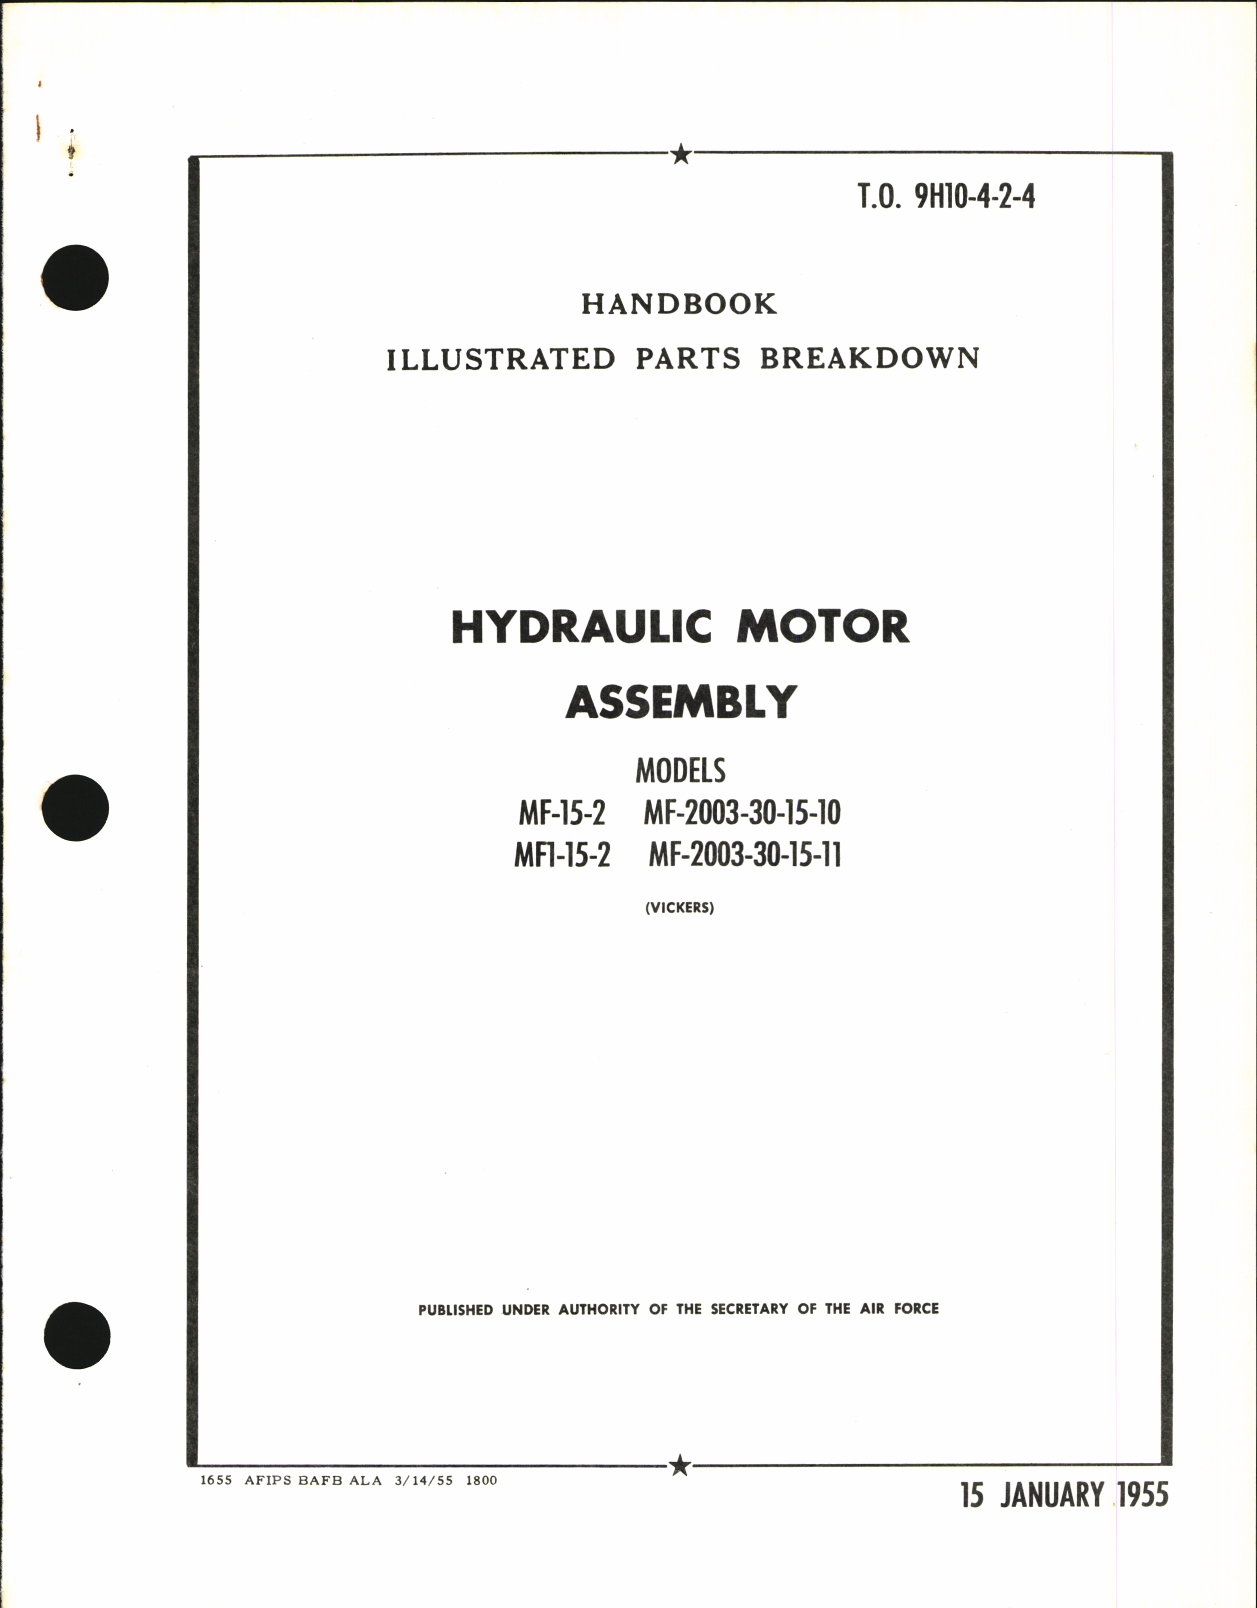 Sample page 1 from AirCorps Library document: Handbook of Illustrated Parts Breakdown for Hydraulic Motor Assembly 